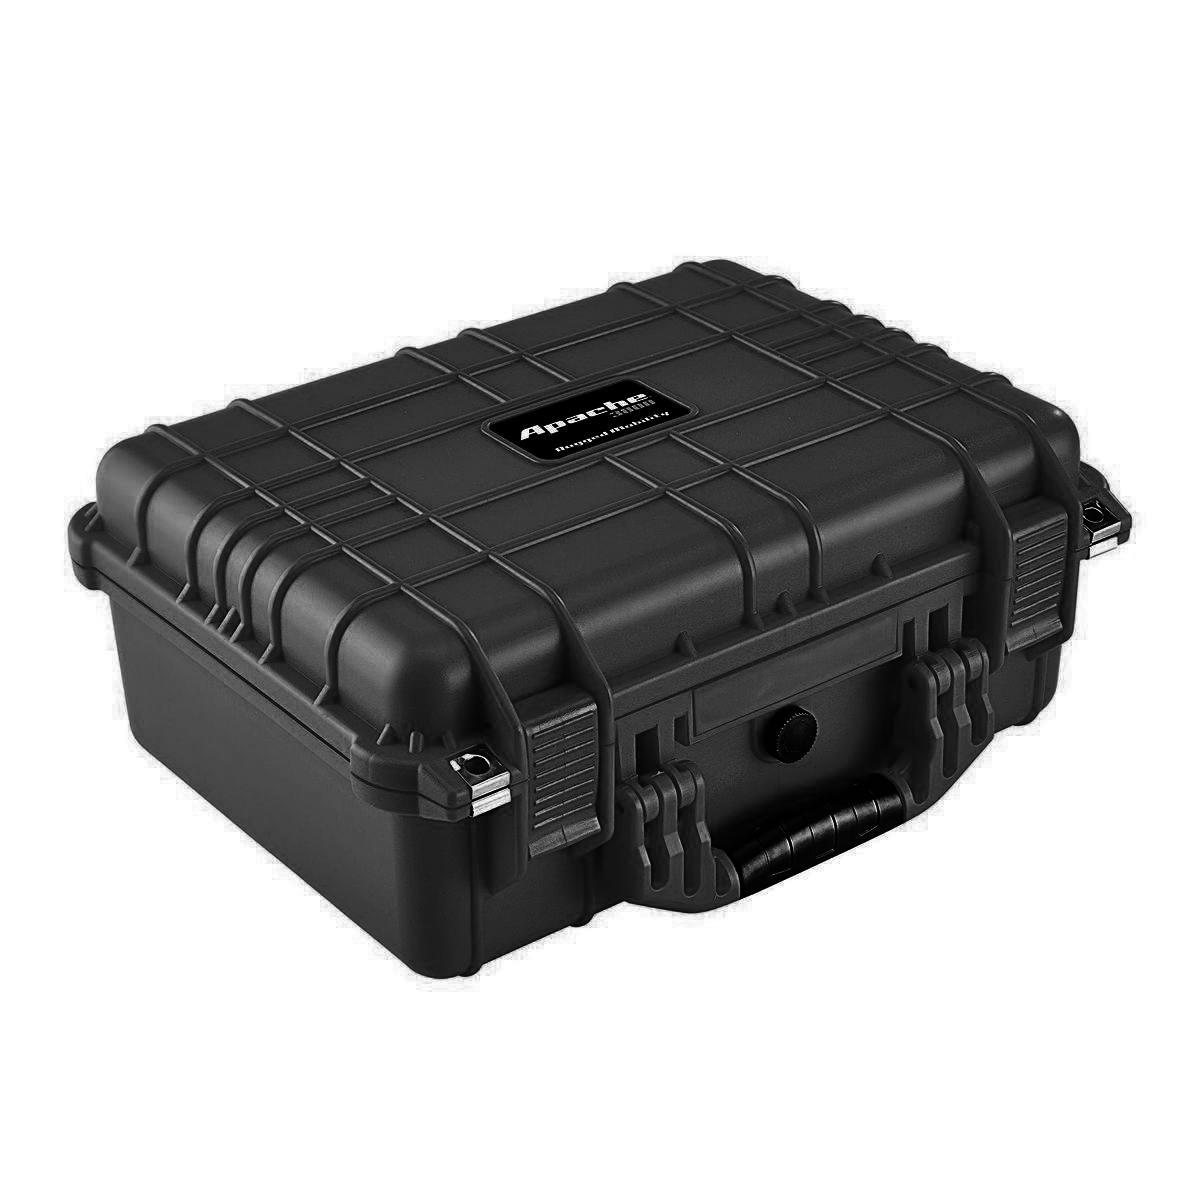 Black Apache 3800 Weatherproof Protective Case, X-Large, Watertight, dust-tight, impact resistant protective case